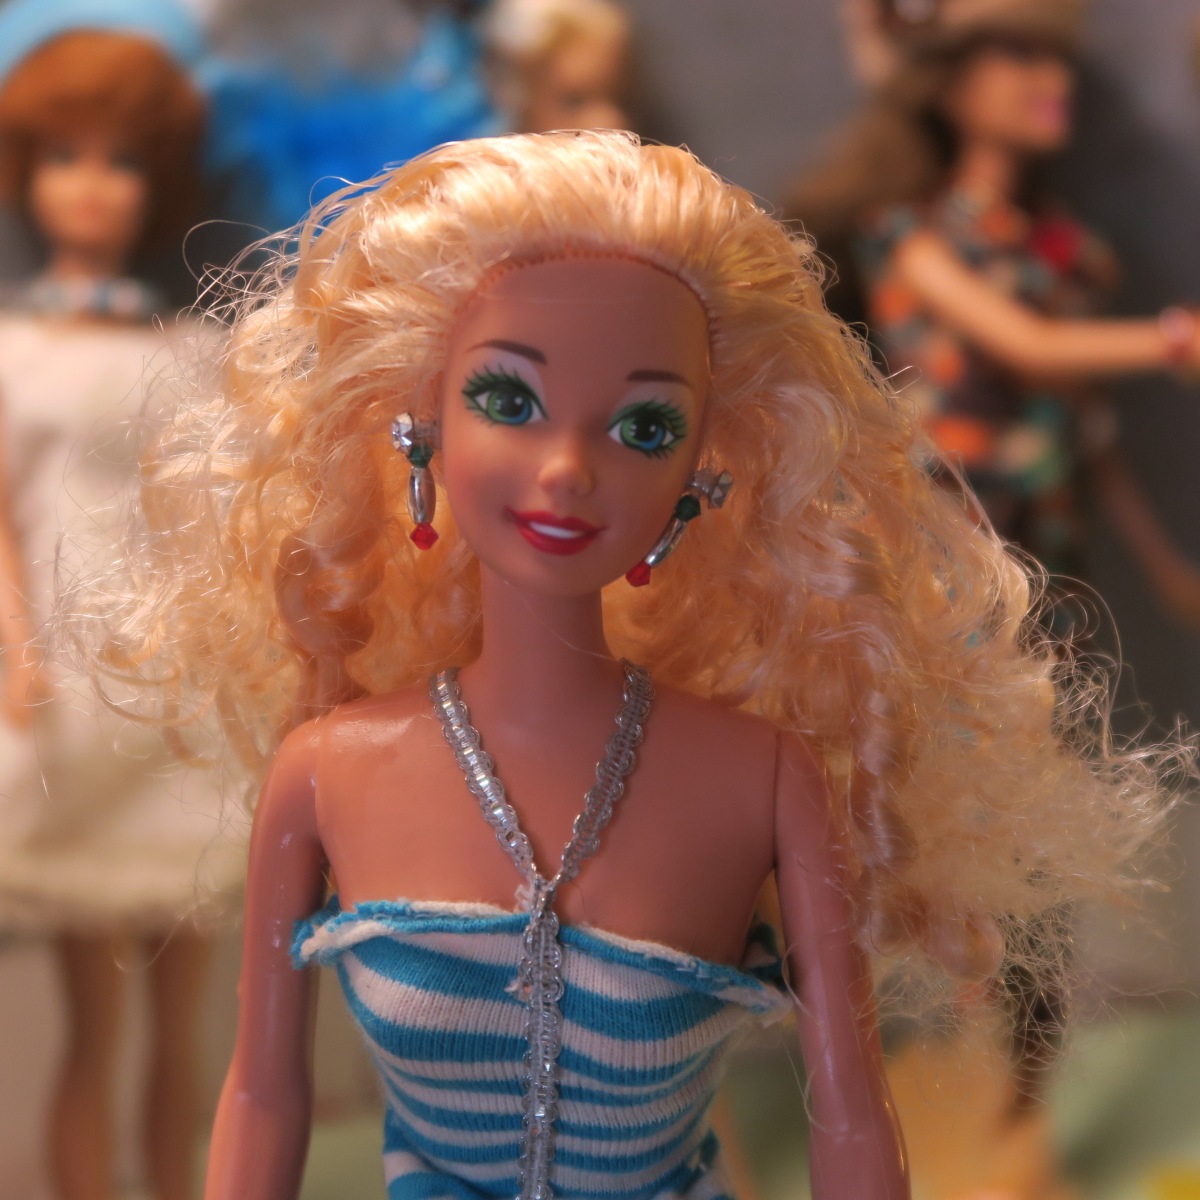 Refurbishing Barbie: Messy Hair Gets a Re-Do! – Home at the WhackyShack